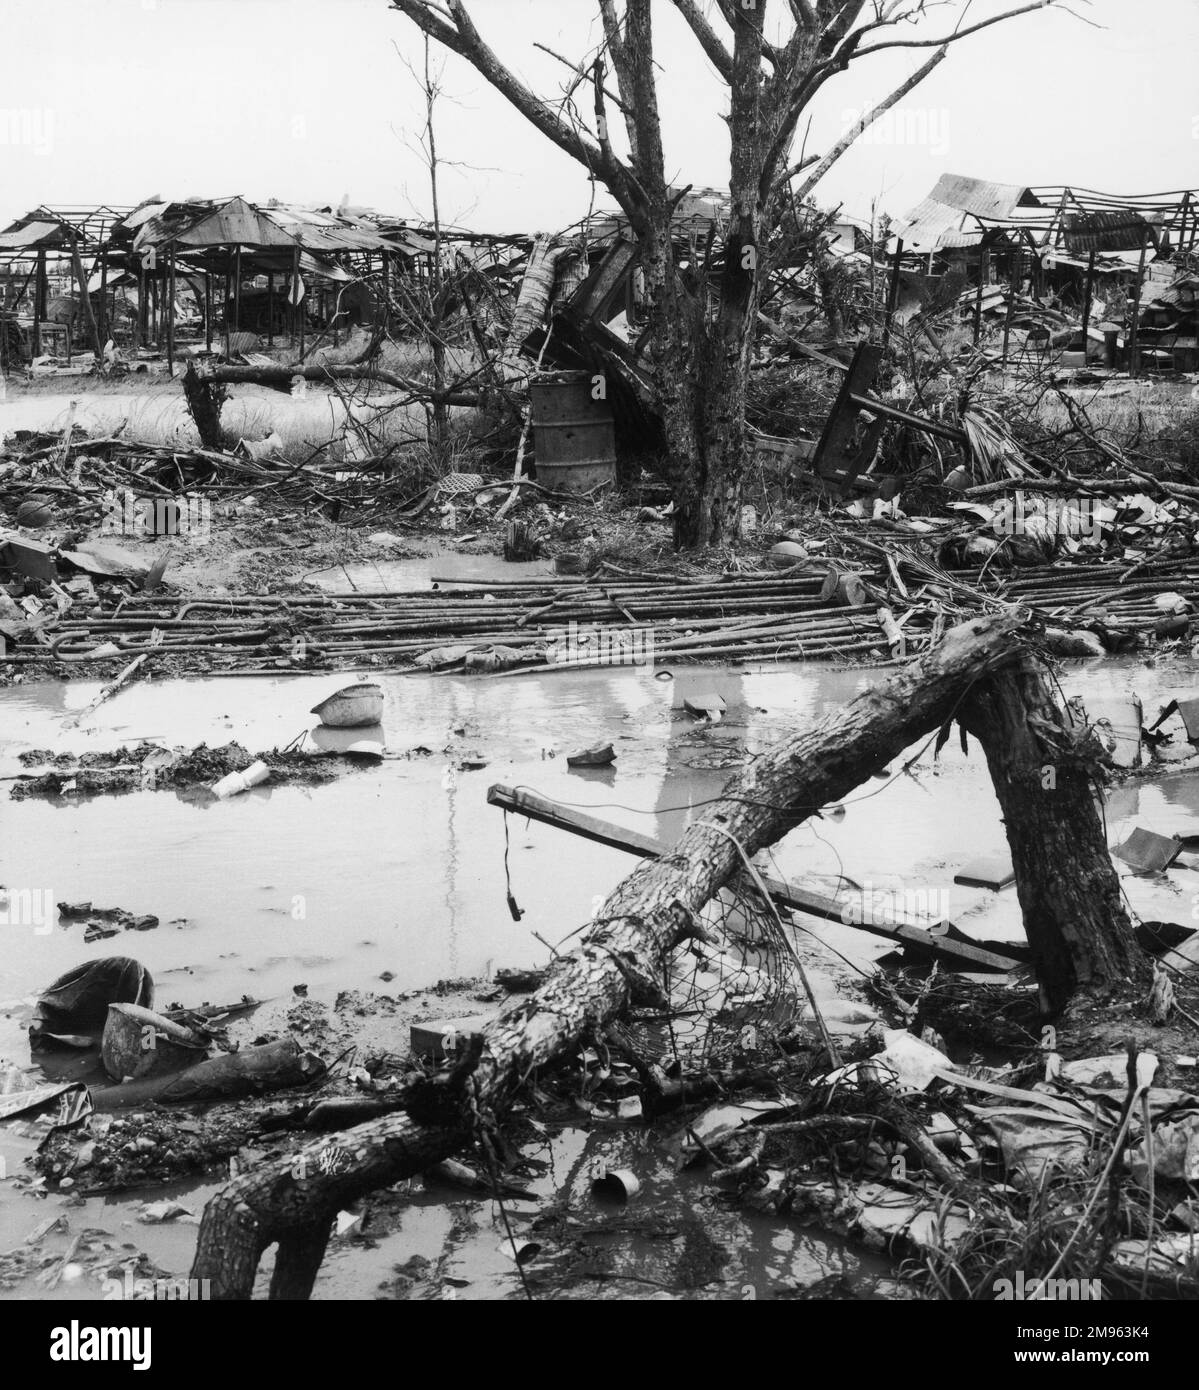 South Vietnam, Quang Tri: The destruction of war is only too evident; discarded helmets sinking in the muddy water, fallen trees and burnt out stalls and shelters Stock Photo